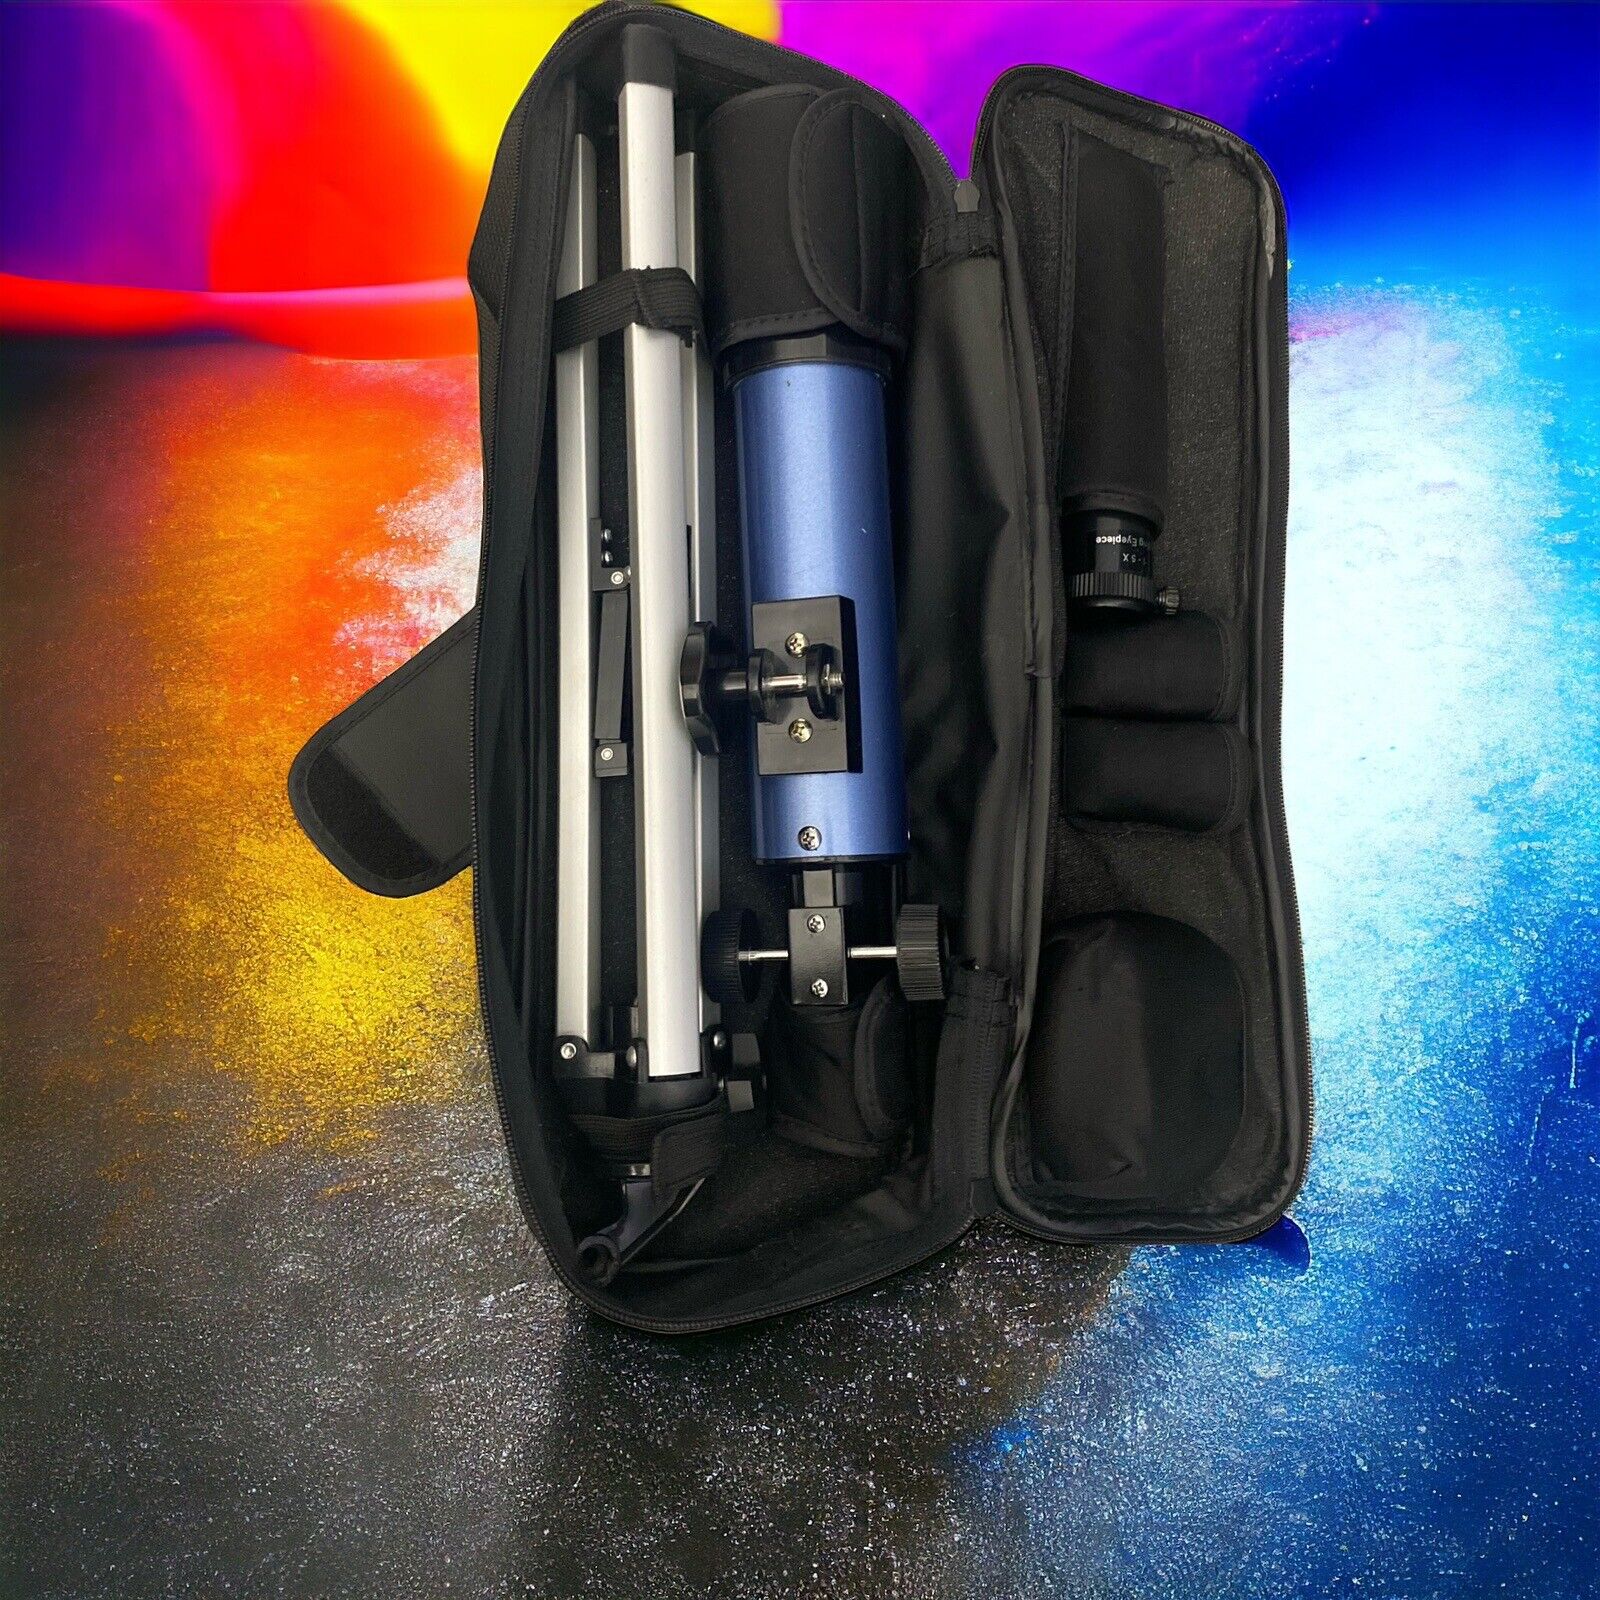 Telescope By Carson Aim 36050 360mm Carrying Case And Tripod W/extras In Bag